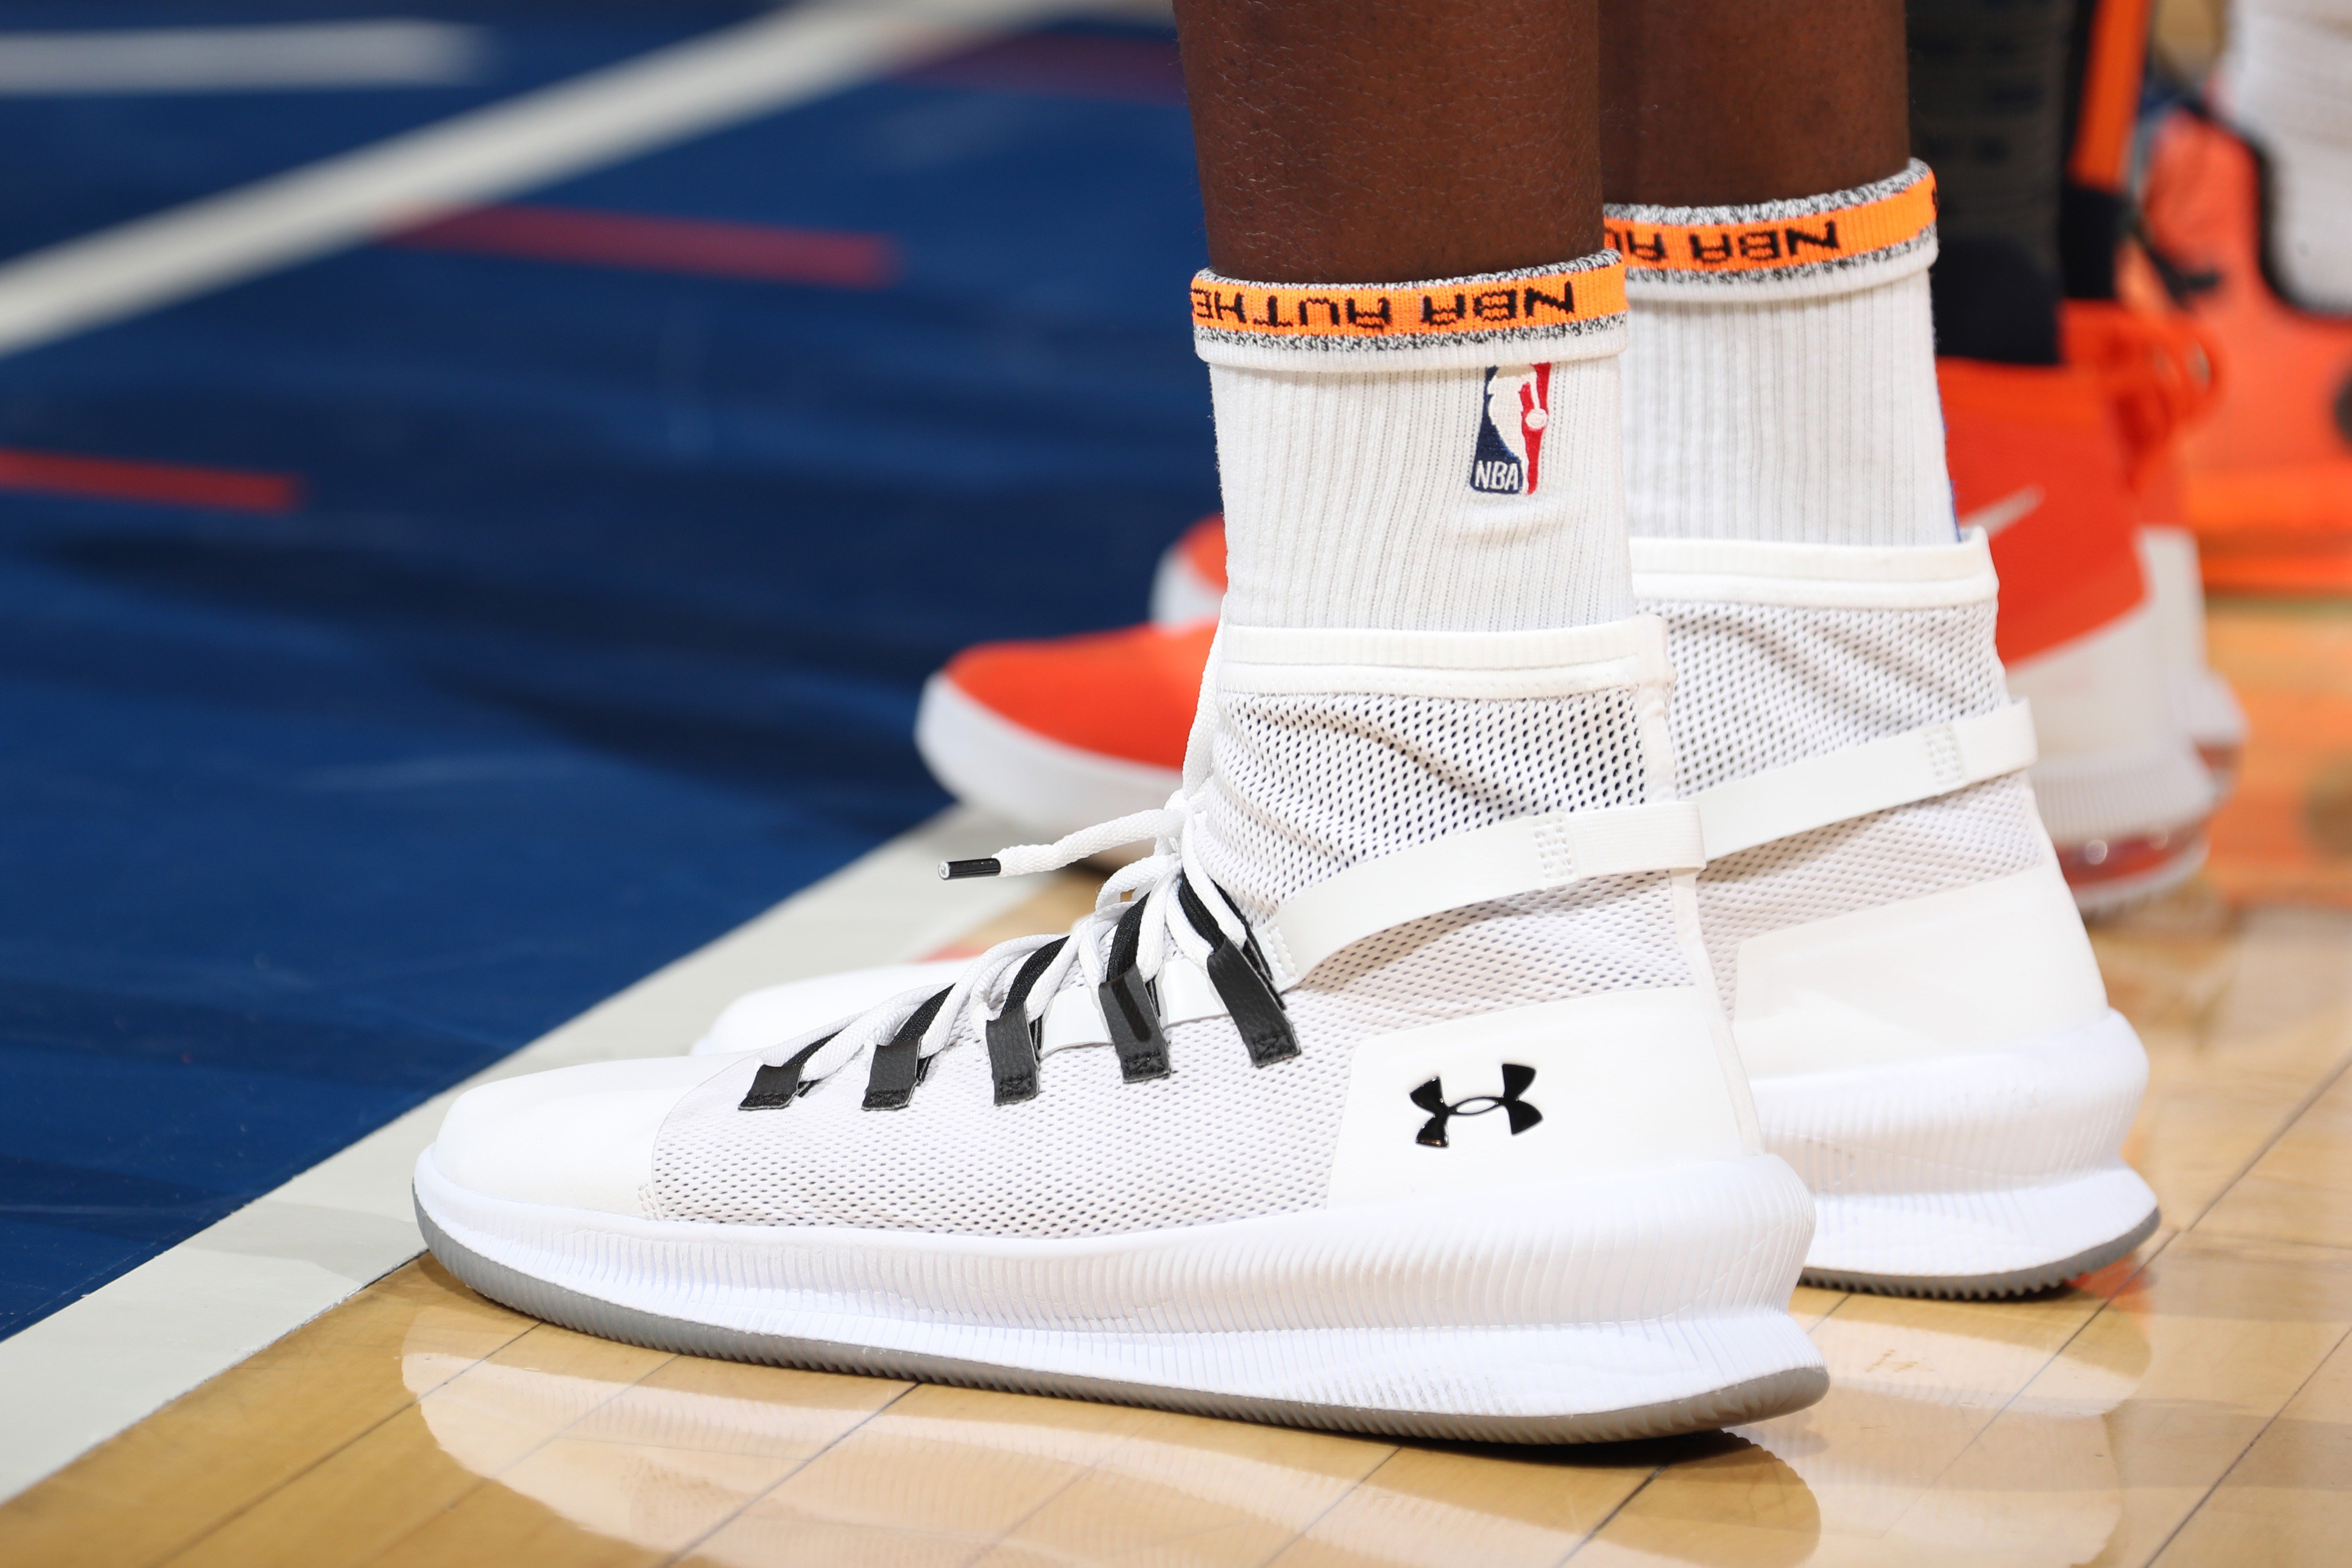 Opuesto Laboratorio Entrada B/R Kicks on Twitter: ".@TheRealMoBamba debuted the Under Armour M-TAG  against the Knicks https://t.co/xhcVE0JKJS" / Twitter